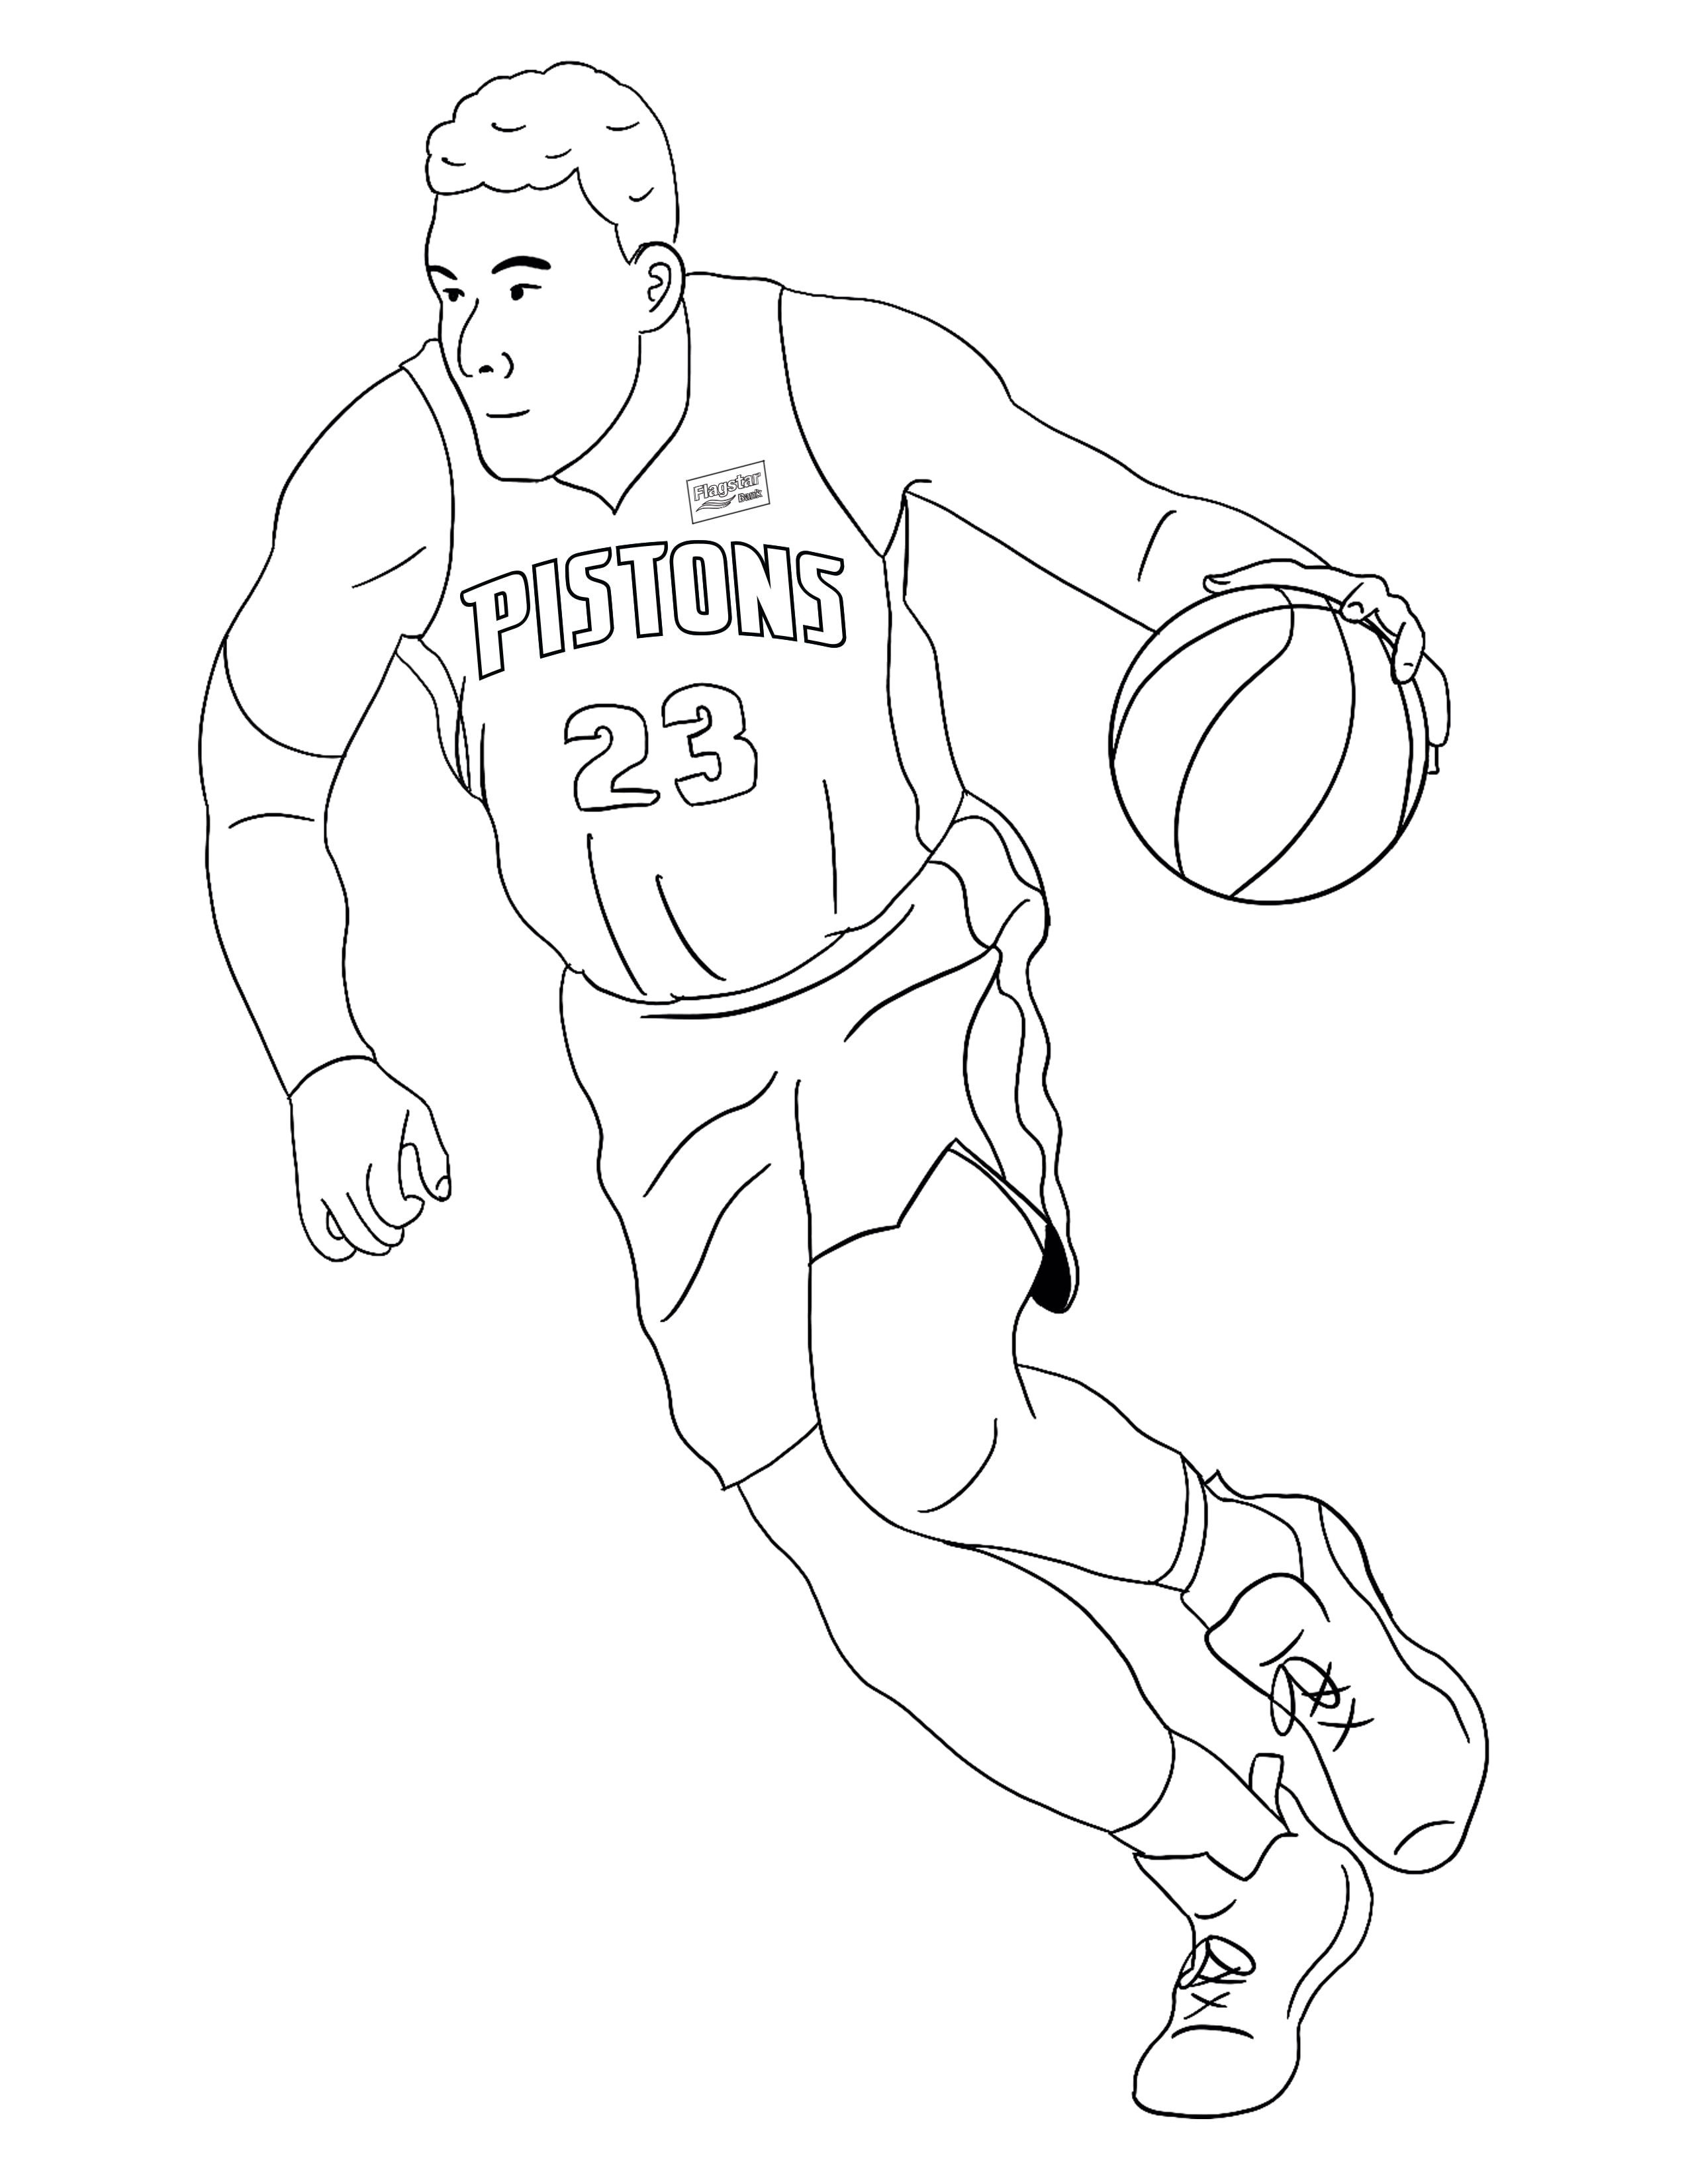 Coloring Pages Photo Gallery | NBA.com